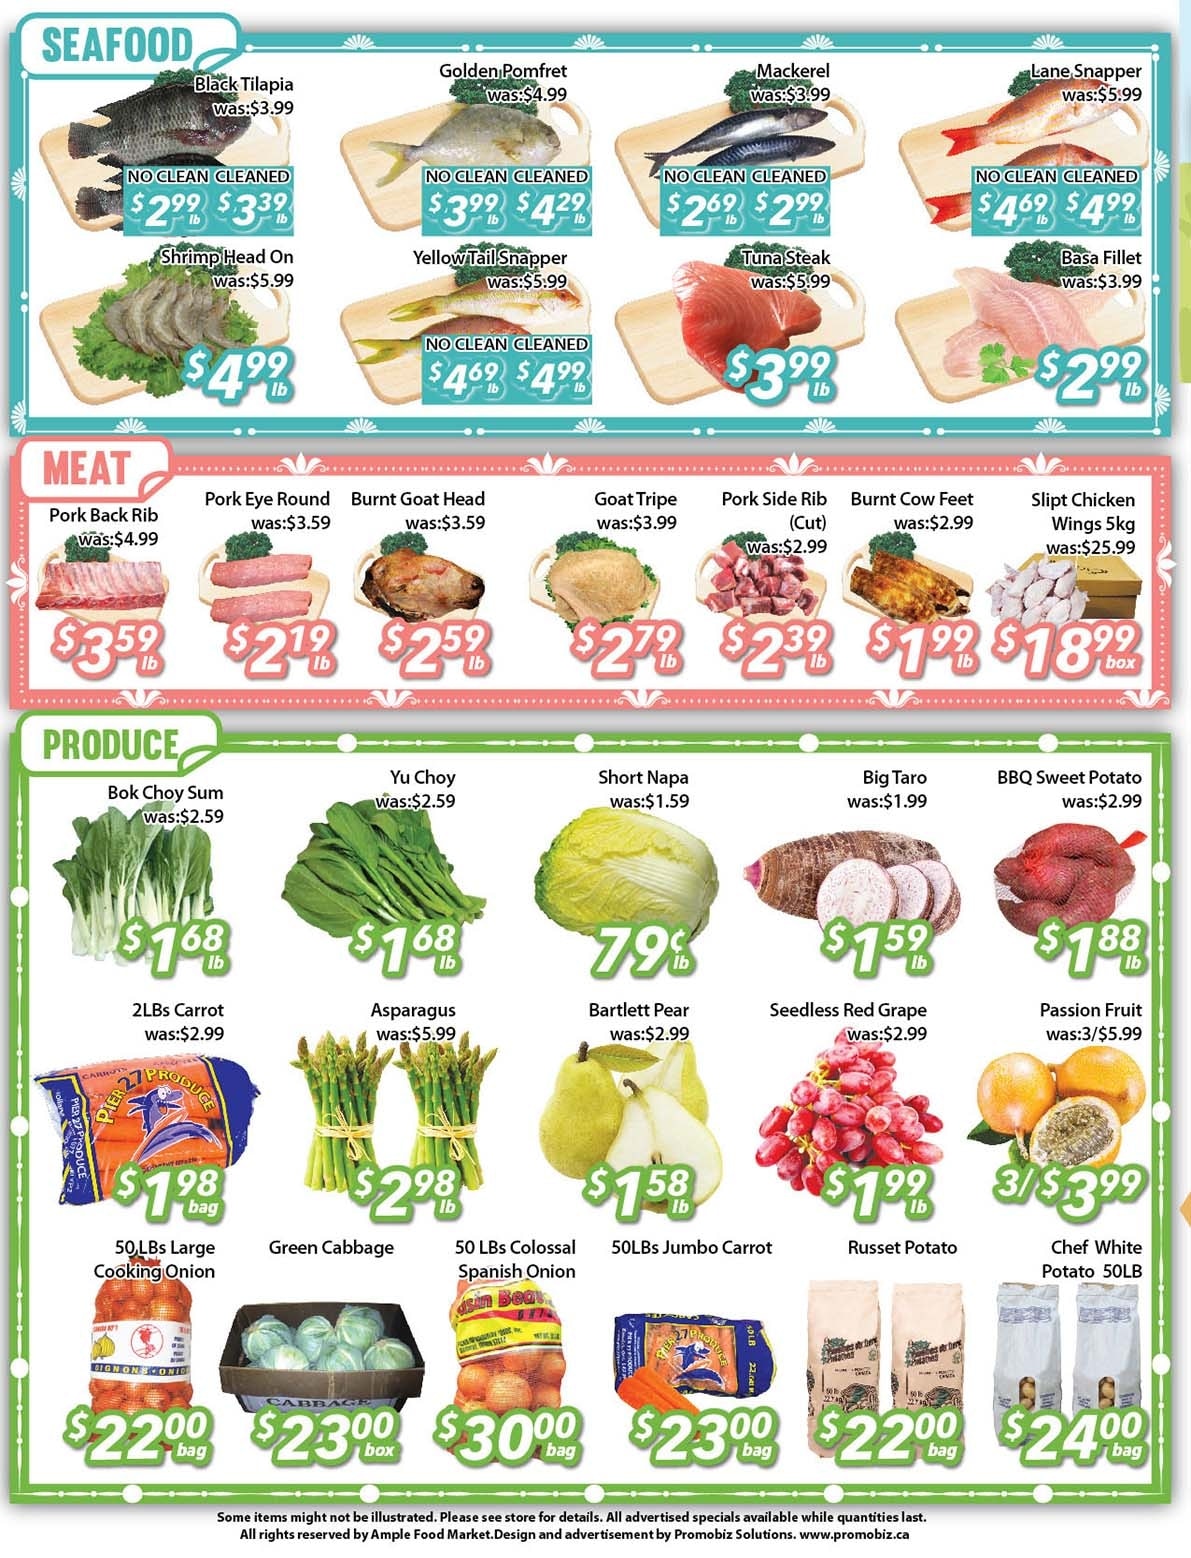 Ample Food Market - Brampton Store - Weekly Flyer Specials - Page 2